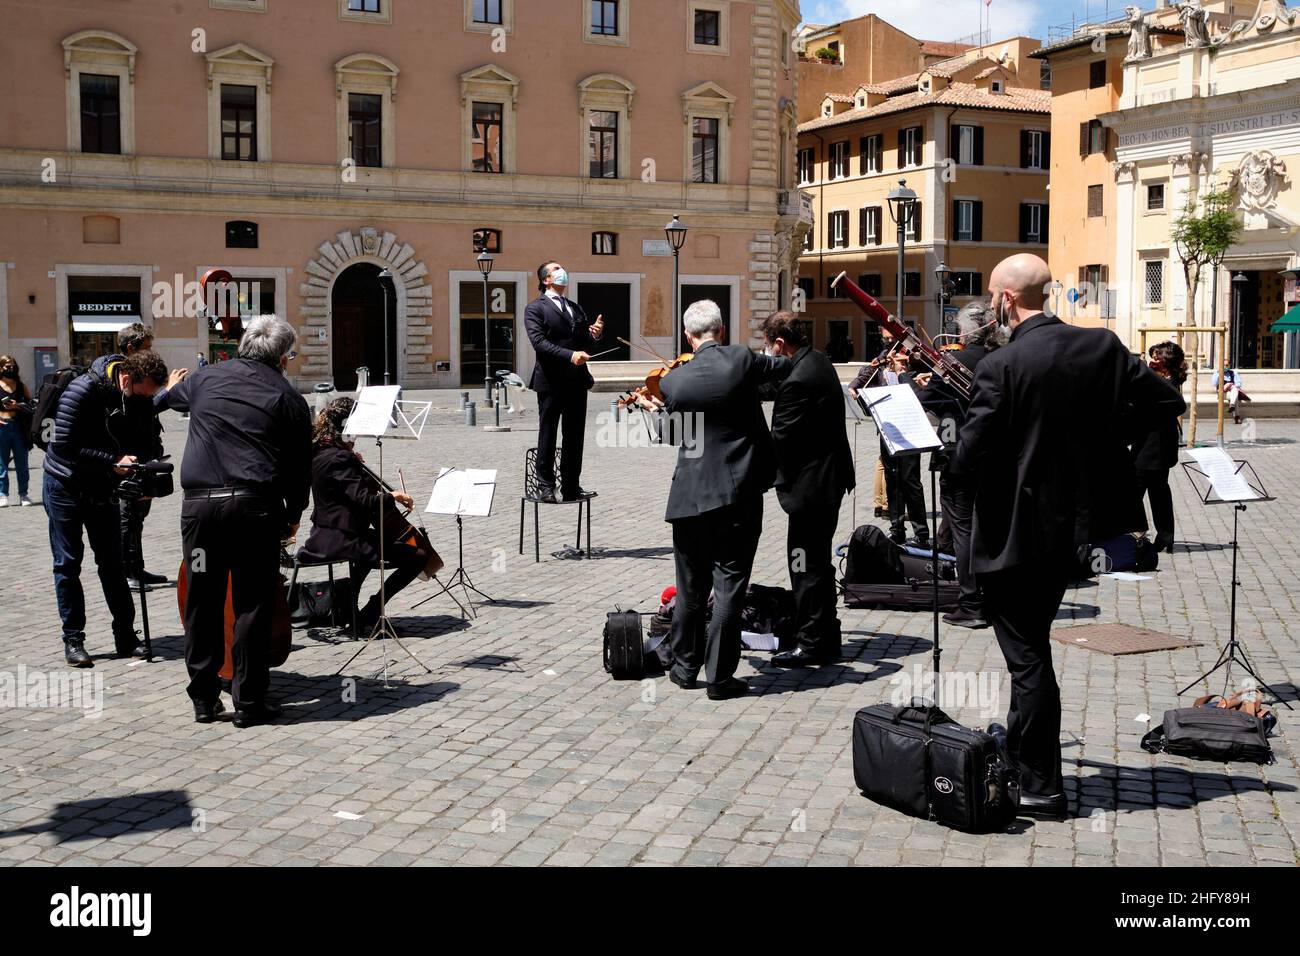 Mauro Scrobogna /LaPresse May 17, 2021&#xa0; Rome, Italy News Middle East crisis - solidarity concert In the photo: A concert in Piazza San Silvestro is the initiative in solidarity of the people of Israel and the Palestinian people of the conductor Alberto Veronesi and a group of musicians from his orchestra Foto Mauro Scrobogna /LaPresse 17-05-2021 Roma , Italia Cronaca Crisi Medio Oriente - concerto solidariet&#xe0; Nella foto: Un concerto in Piazza San Silvestro &#xe9; l&#x2019; iniziativa in solidariet&#xe0; del popolo di Israele e del popolo palestinese del direttore d&#x2019;orchestra A Stock Photo